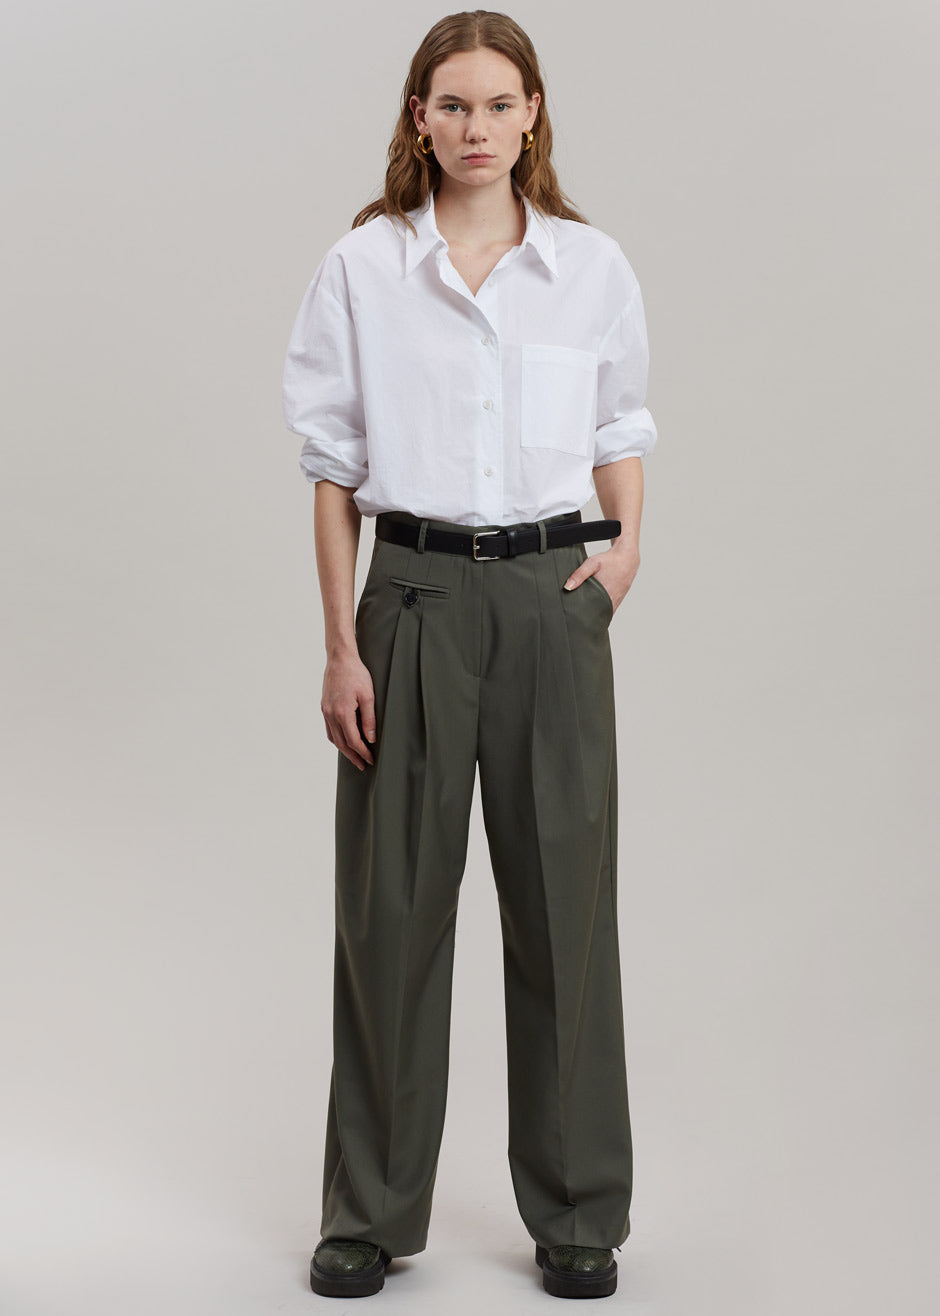 Ainsley Pants - Olive - 1